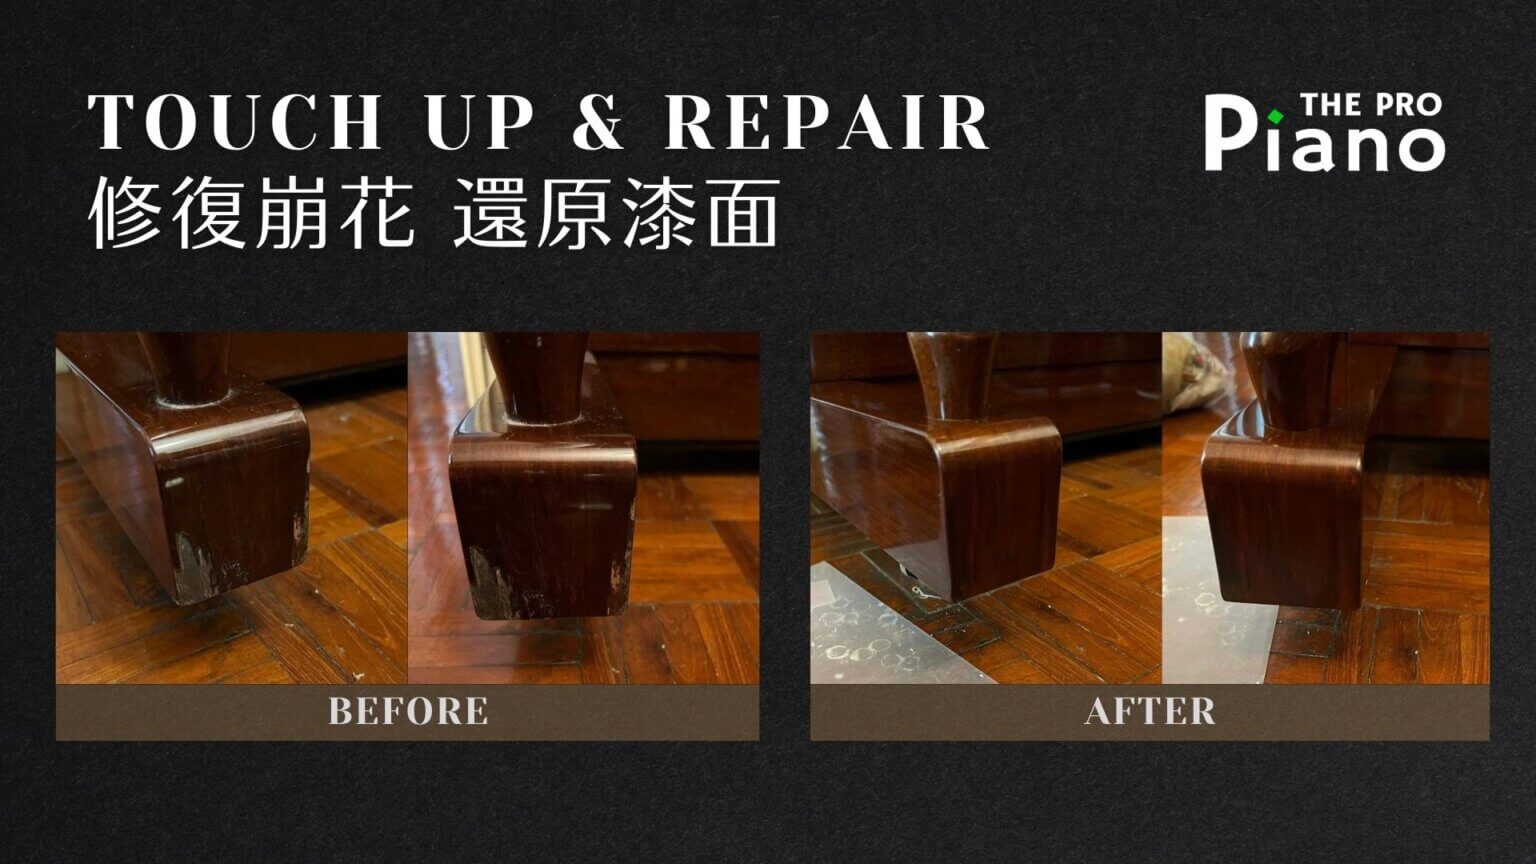 THE PRO PIANO - Touch-up Repair Services